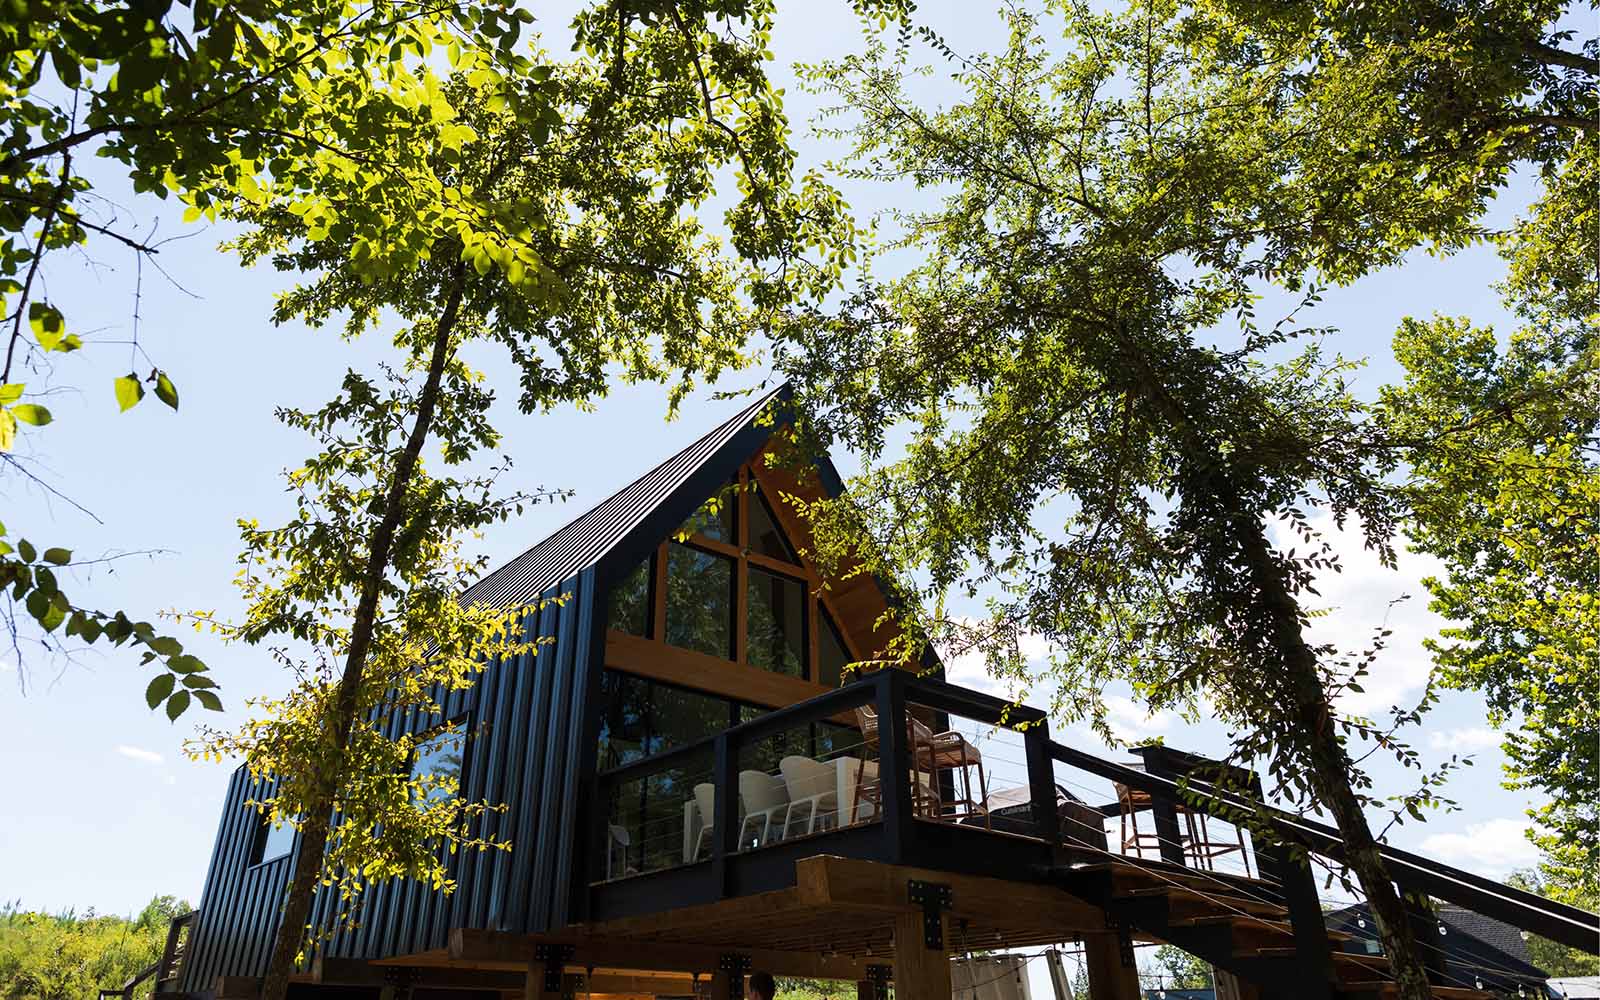 An a-frame cabin in Beavers Bend / Hochatown